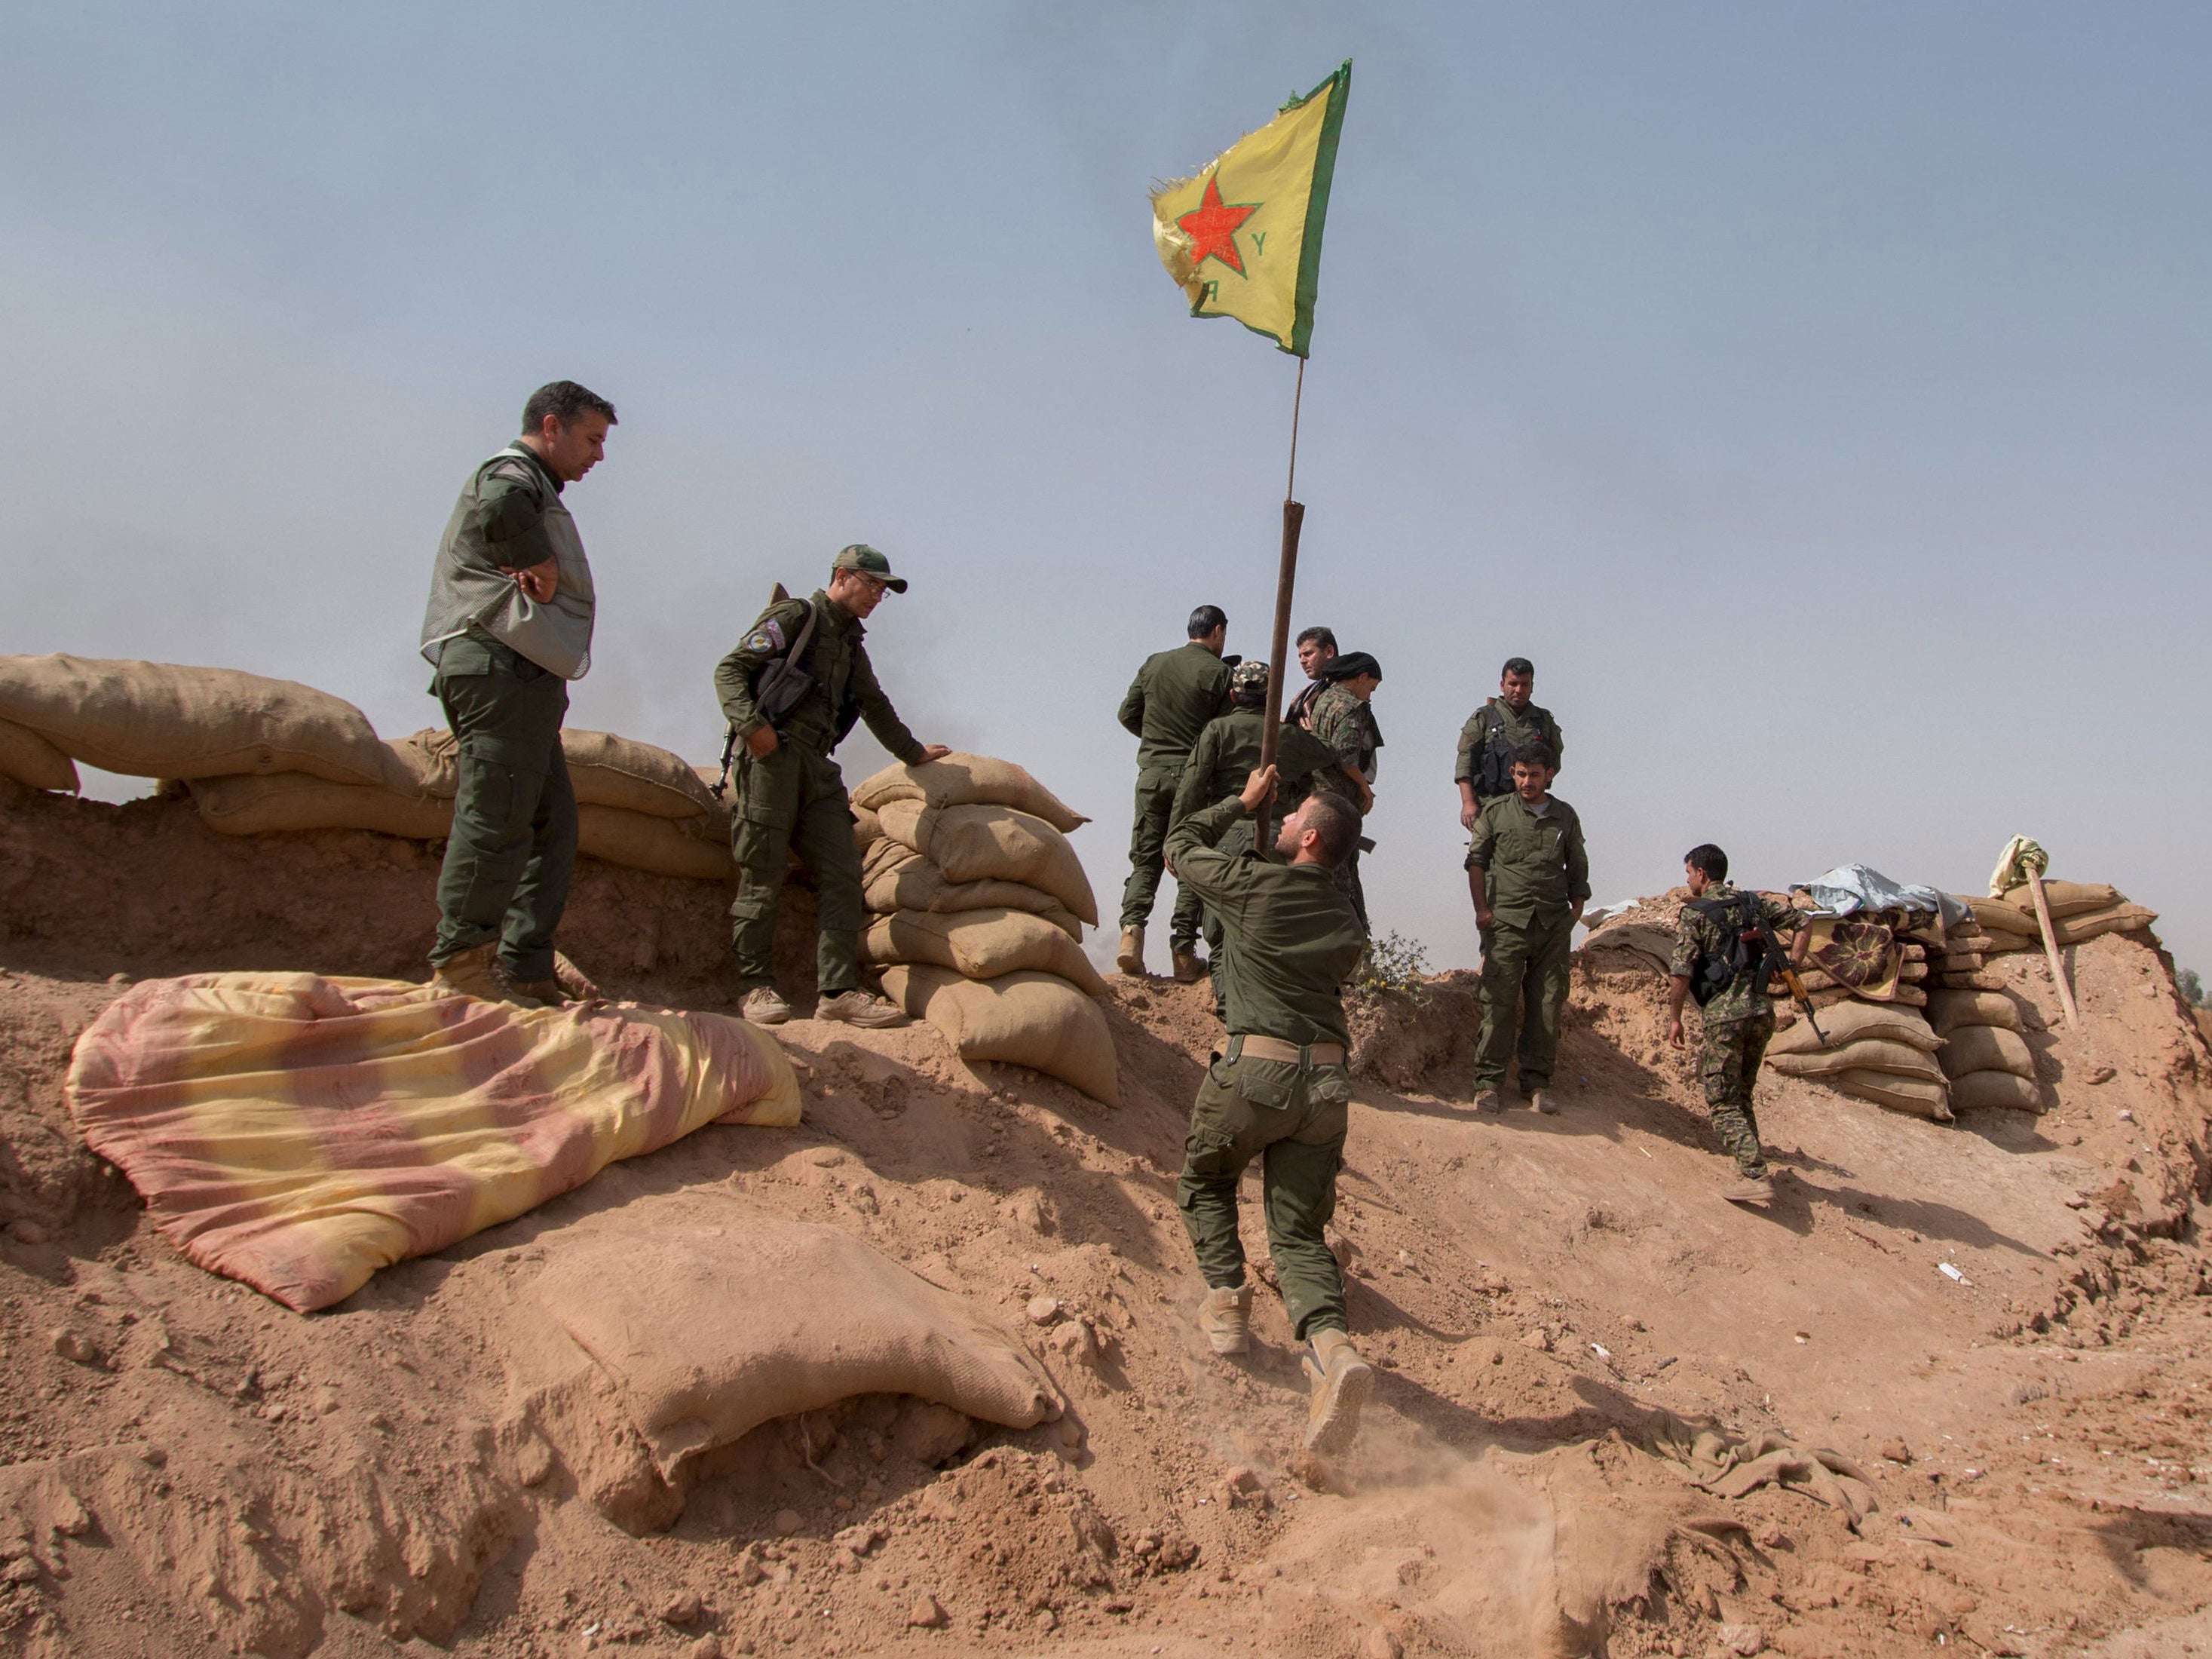 Kurdish soldiers raise the YPG flag in Syria. The group is unusual in its recognition of gender equality and includes all-women units